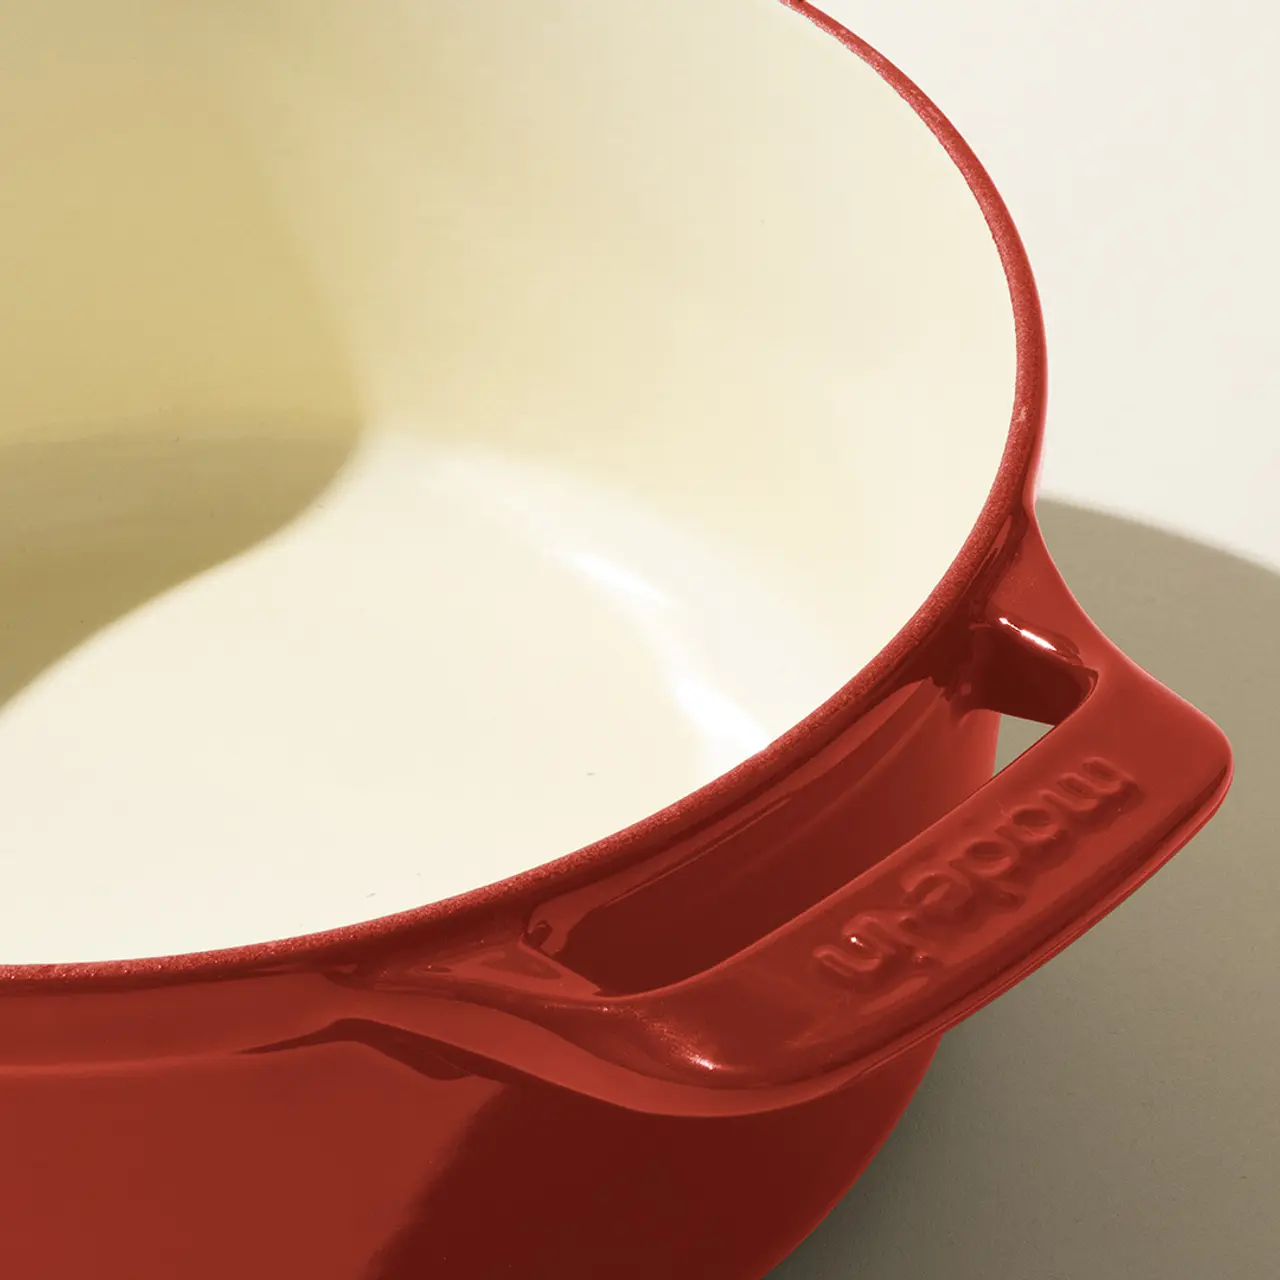 Close-up of a red ceramic baking dish with handles, showcasing its glossy interior and exterior texture.